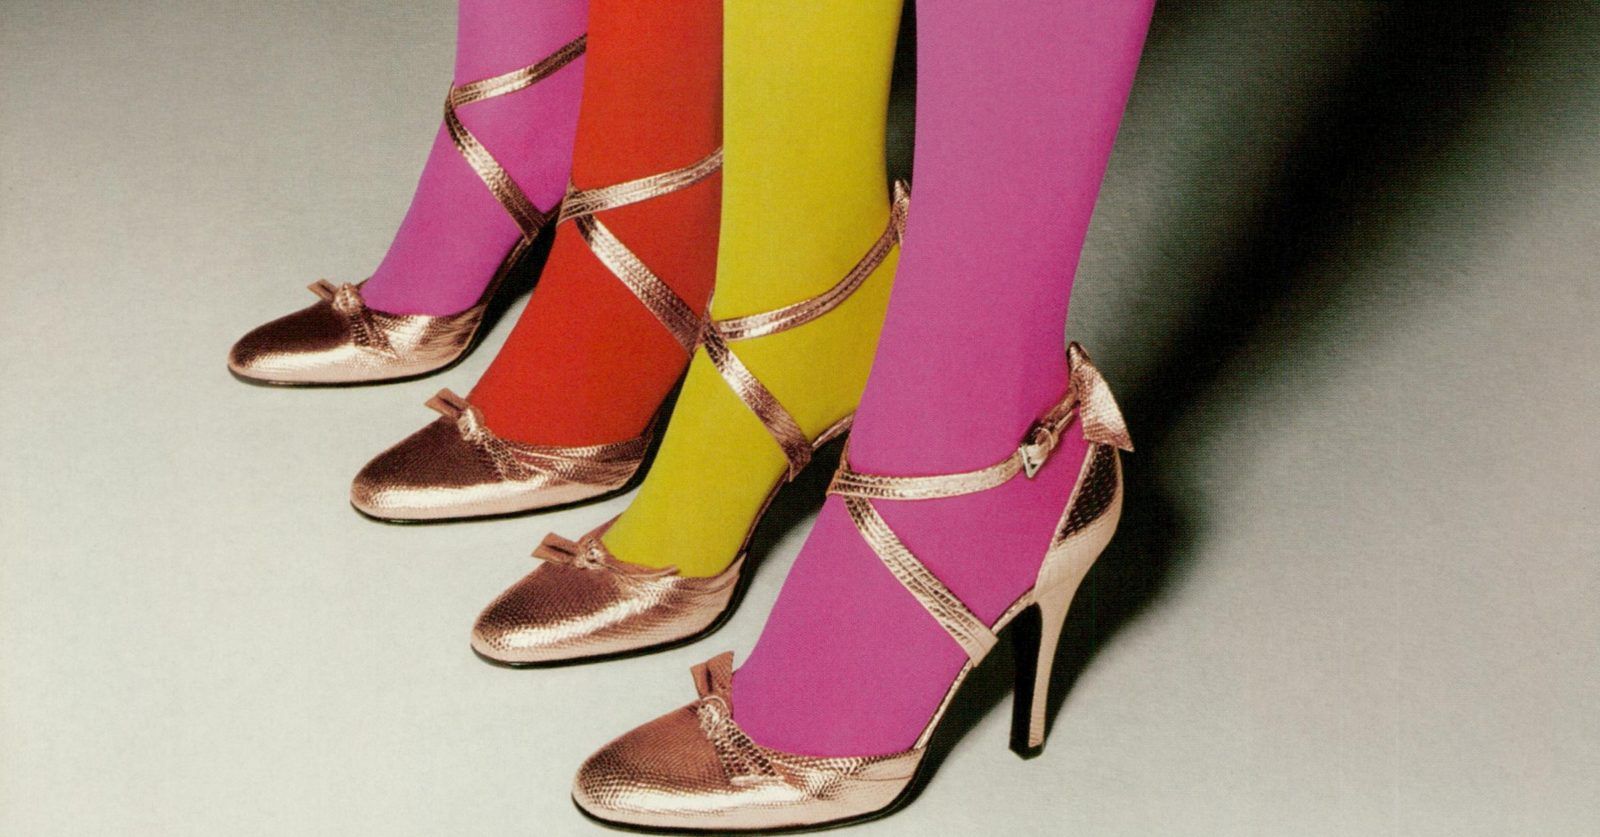 A look at Rossi's most iconic shoes from the 1960s to the 1990s